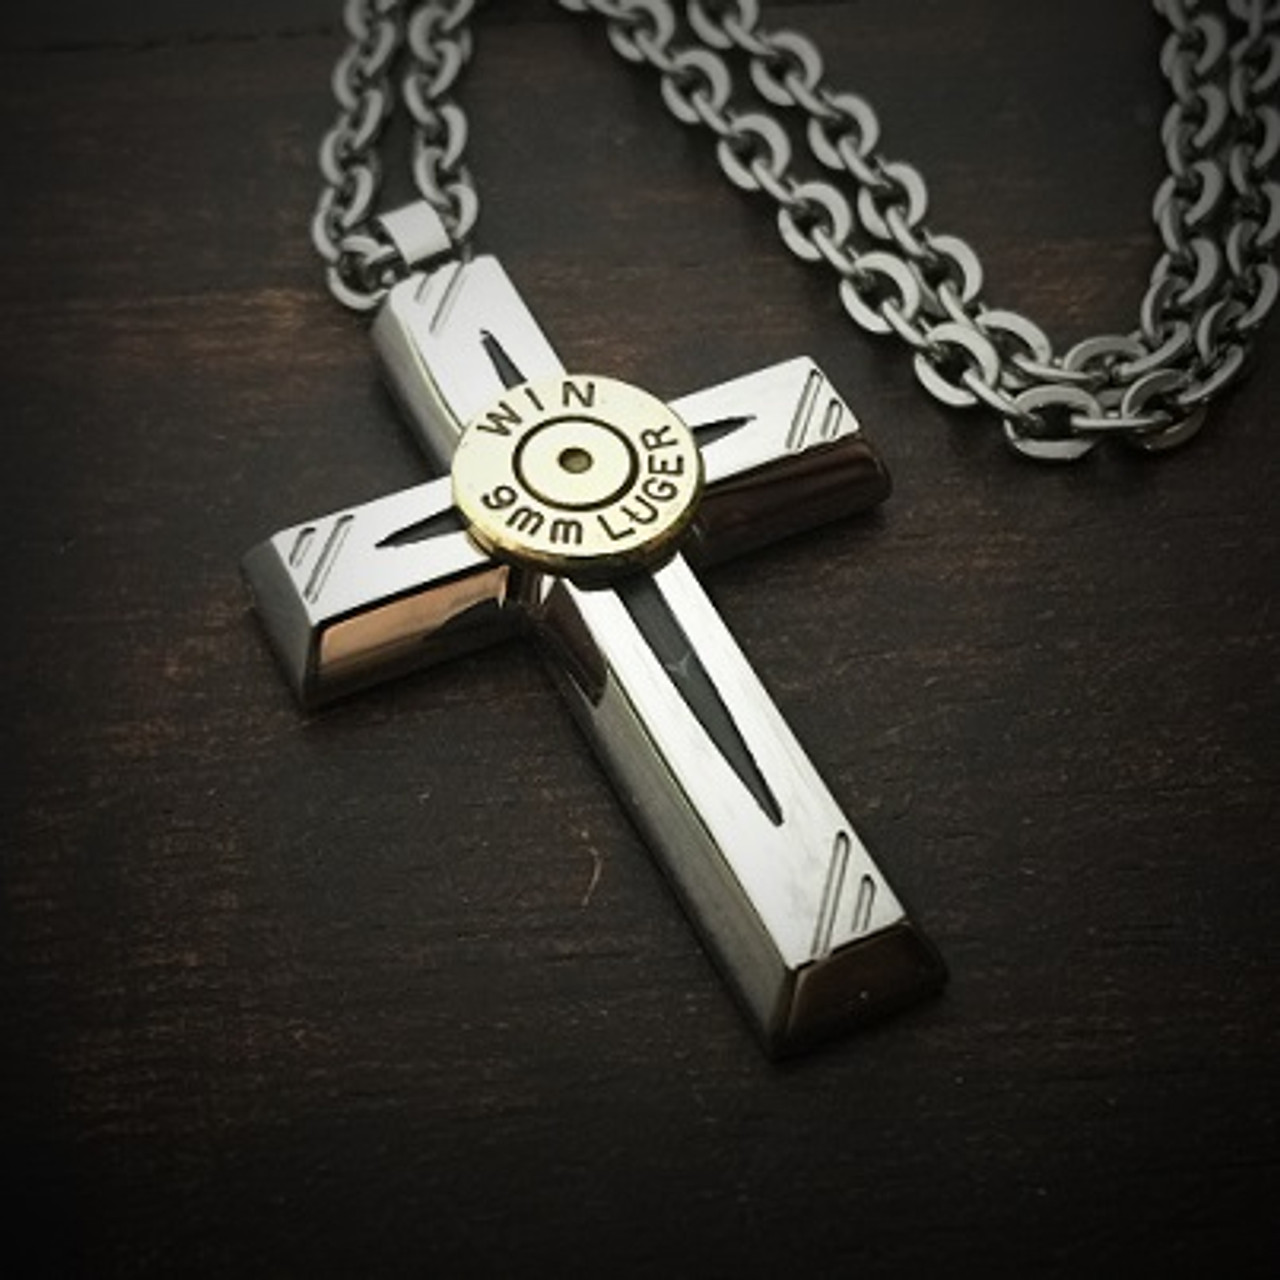 Stainless Steel Cross Bullet Necklace with 9 mm Bullet. Optional Crystal. |  eBay